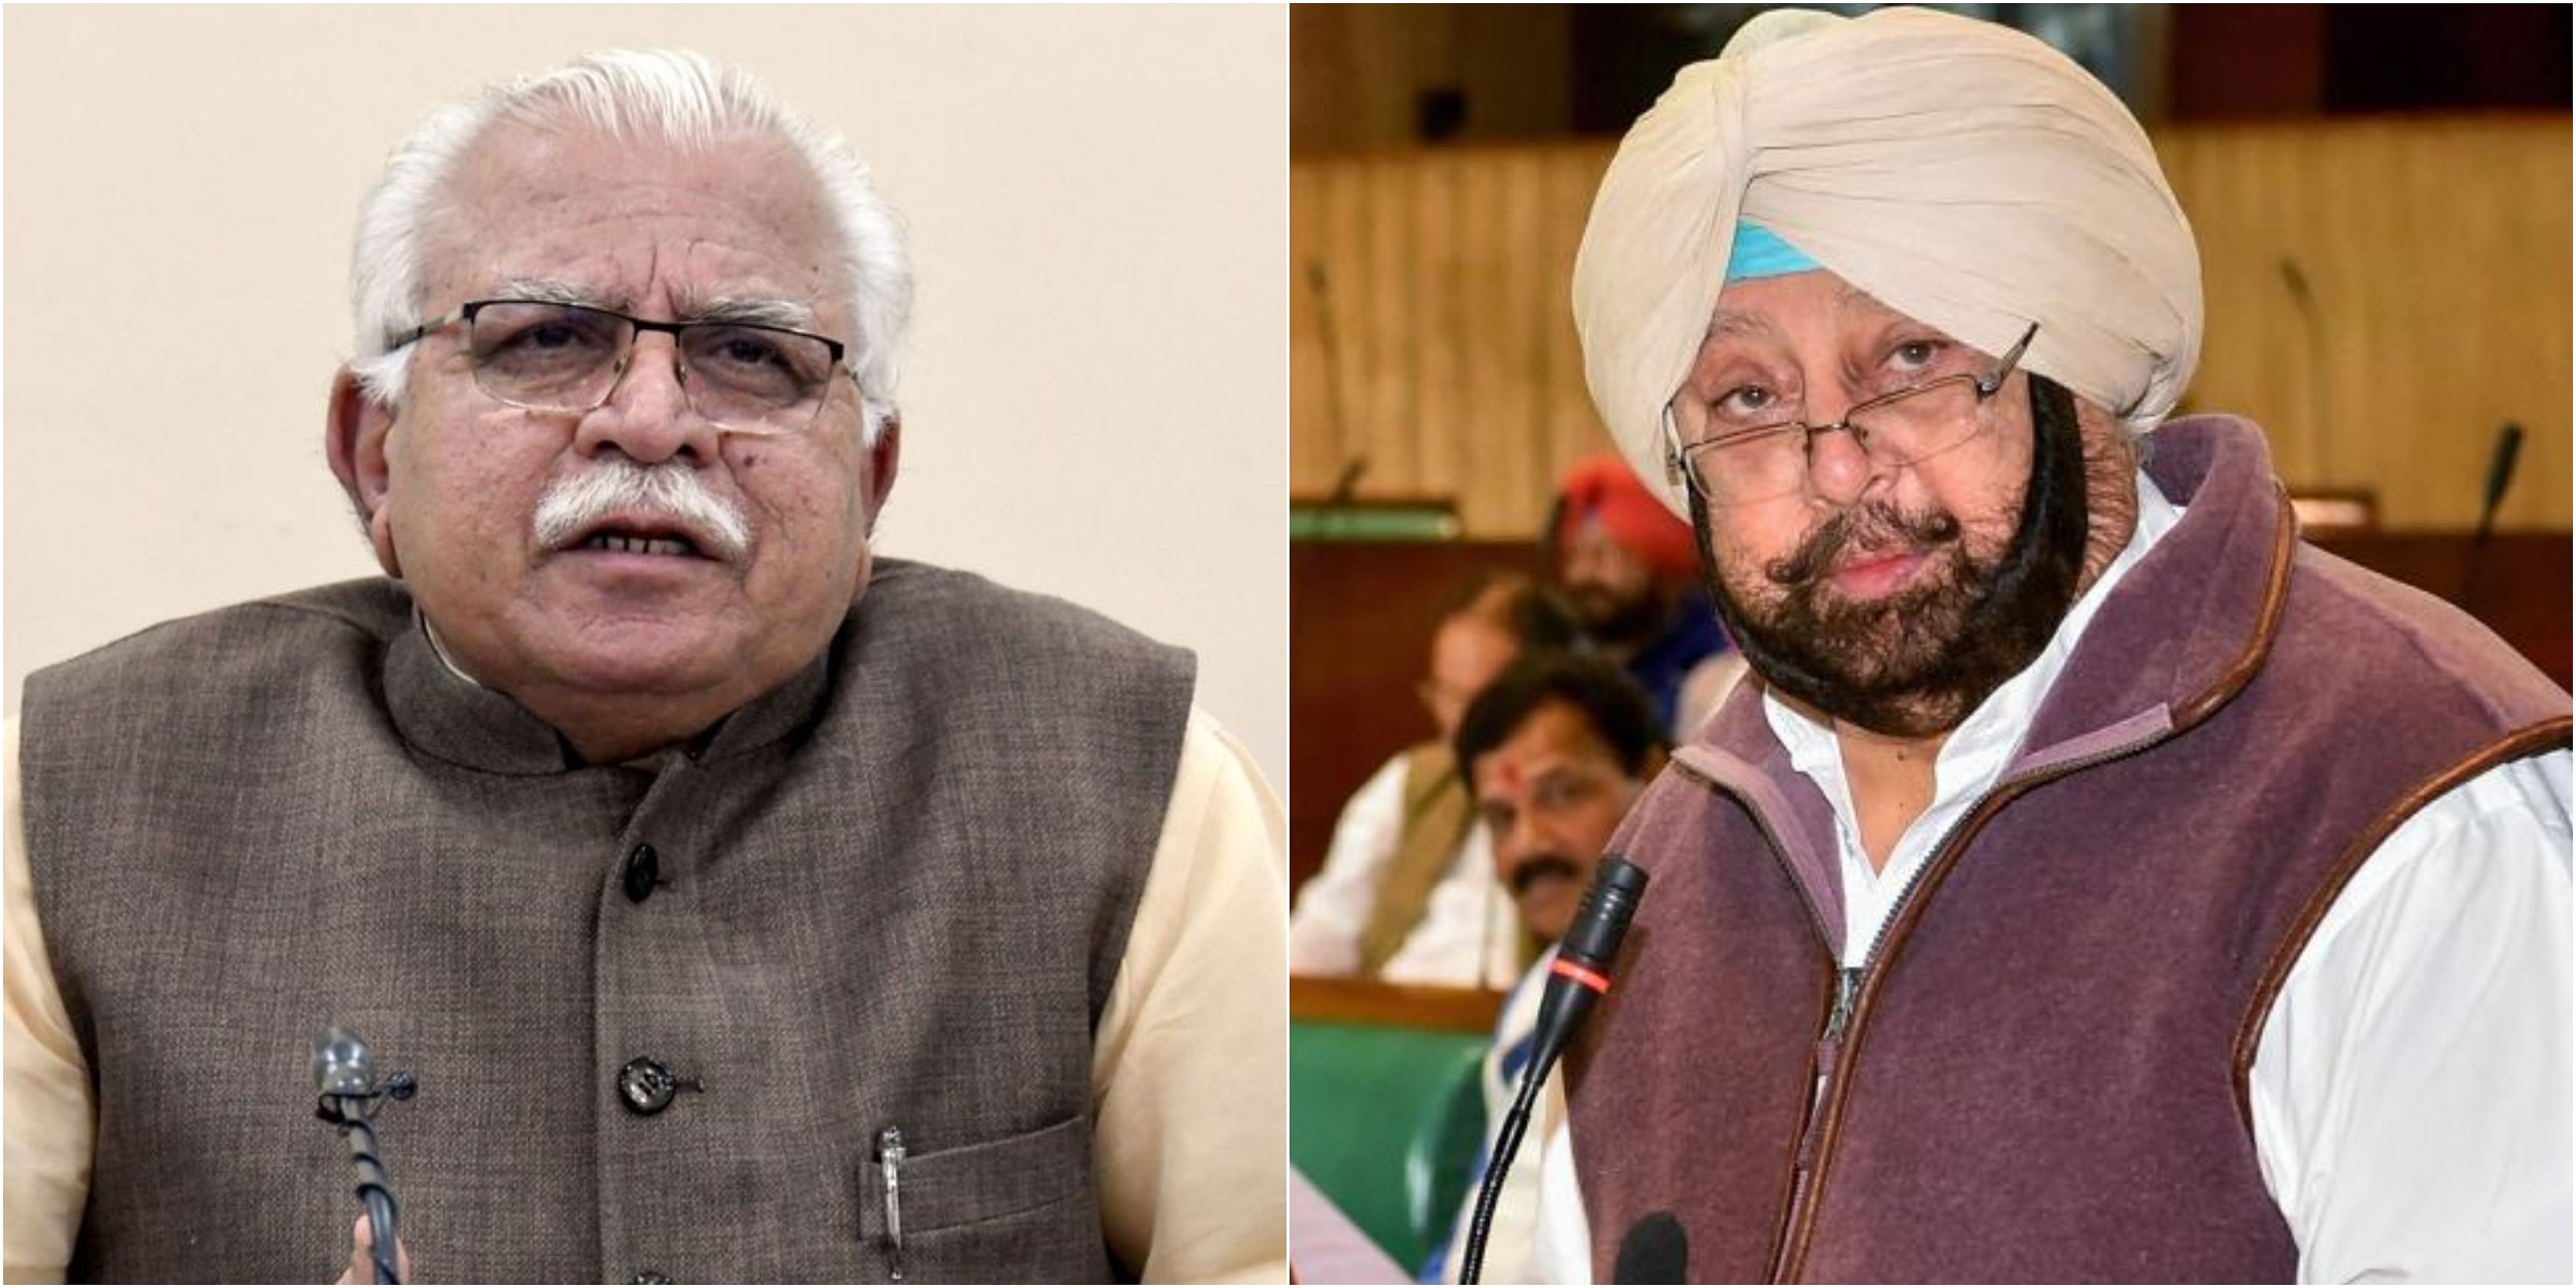 Khattar pointed out to Singh that he has already pledged to quit politics if the Minimum Support Price mechanism is ever dismantled.